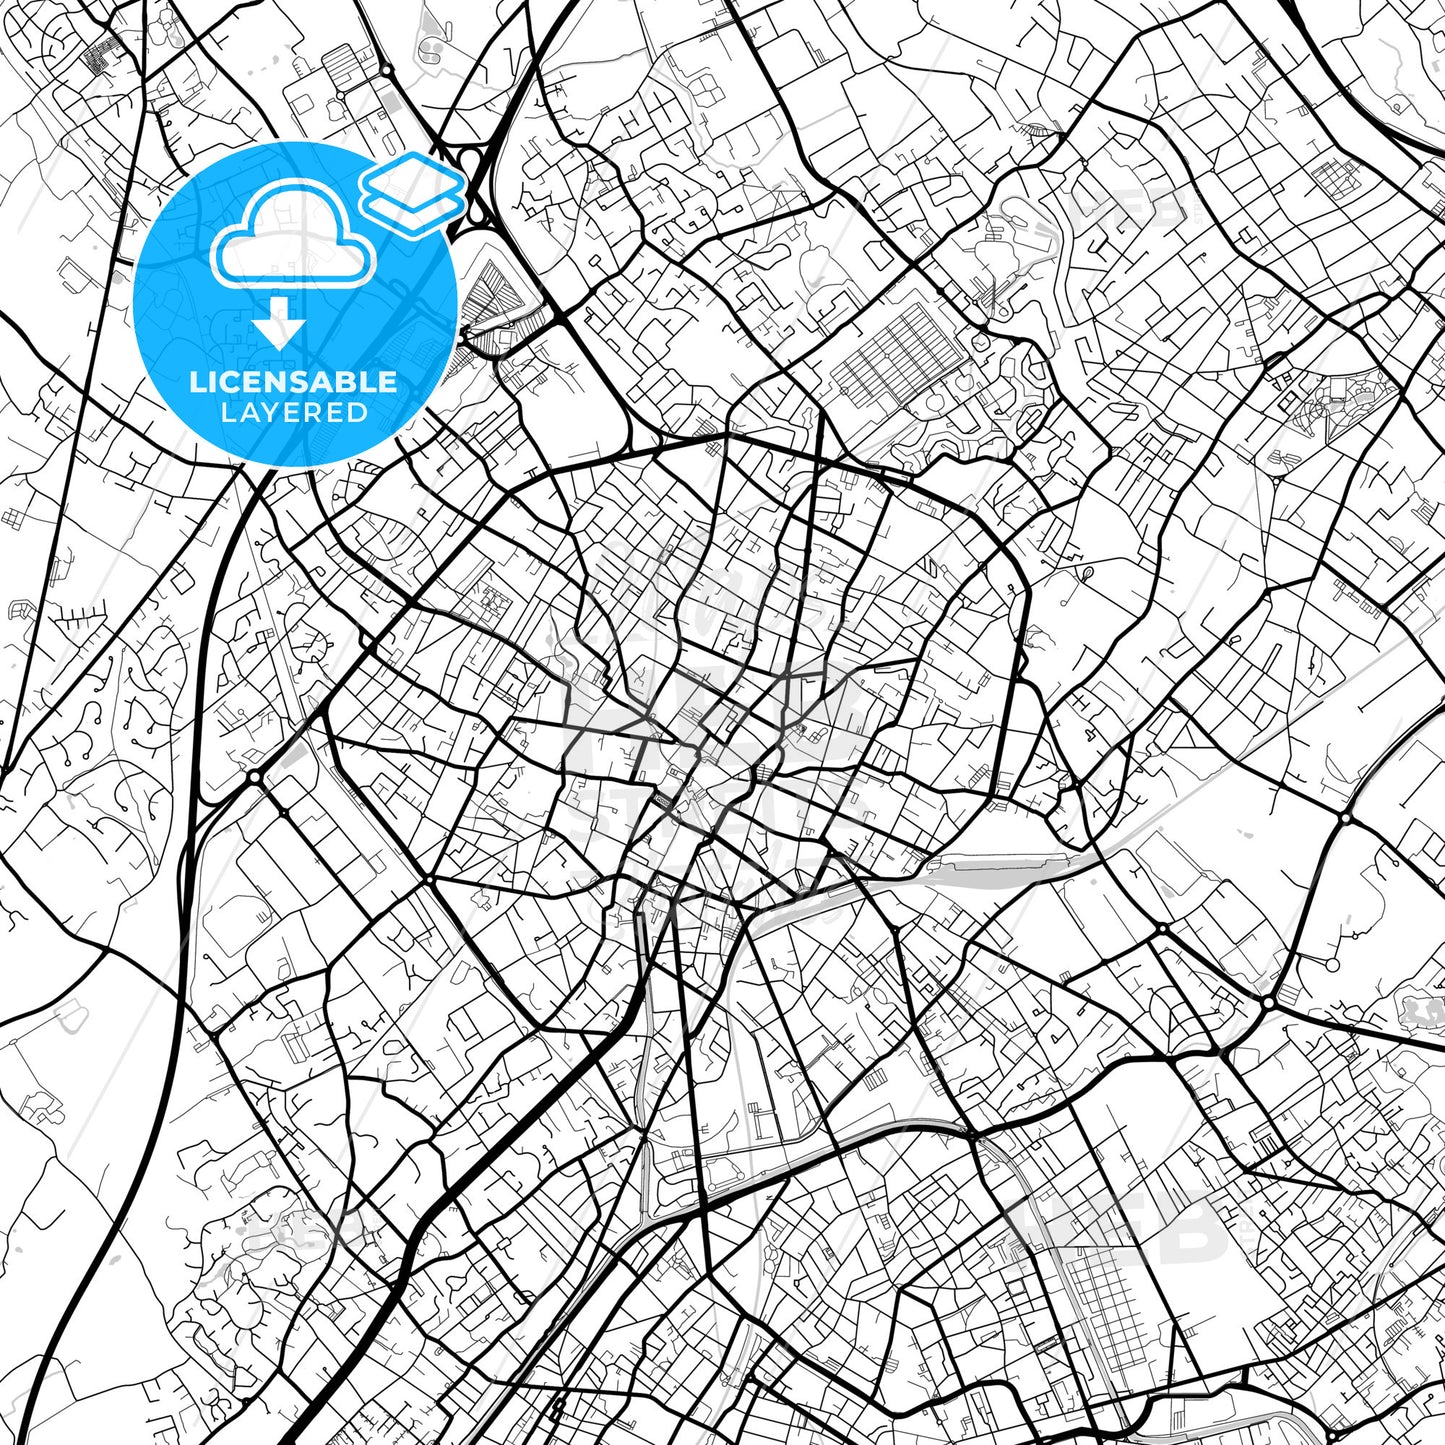 Layered PDF map of Tourcoing, Nord, France